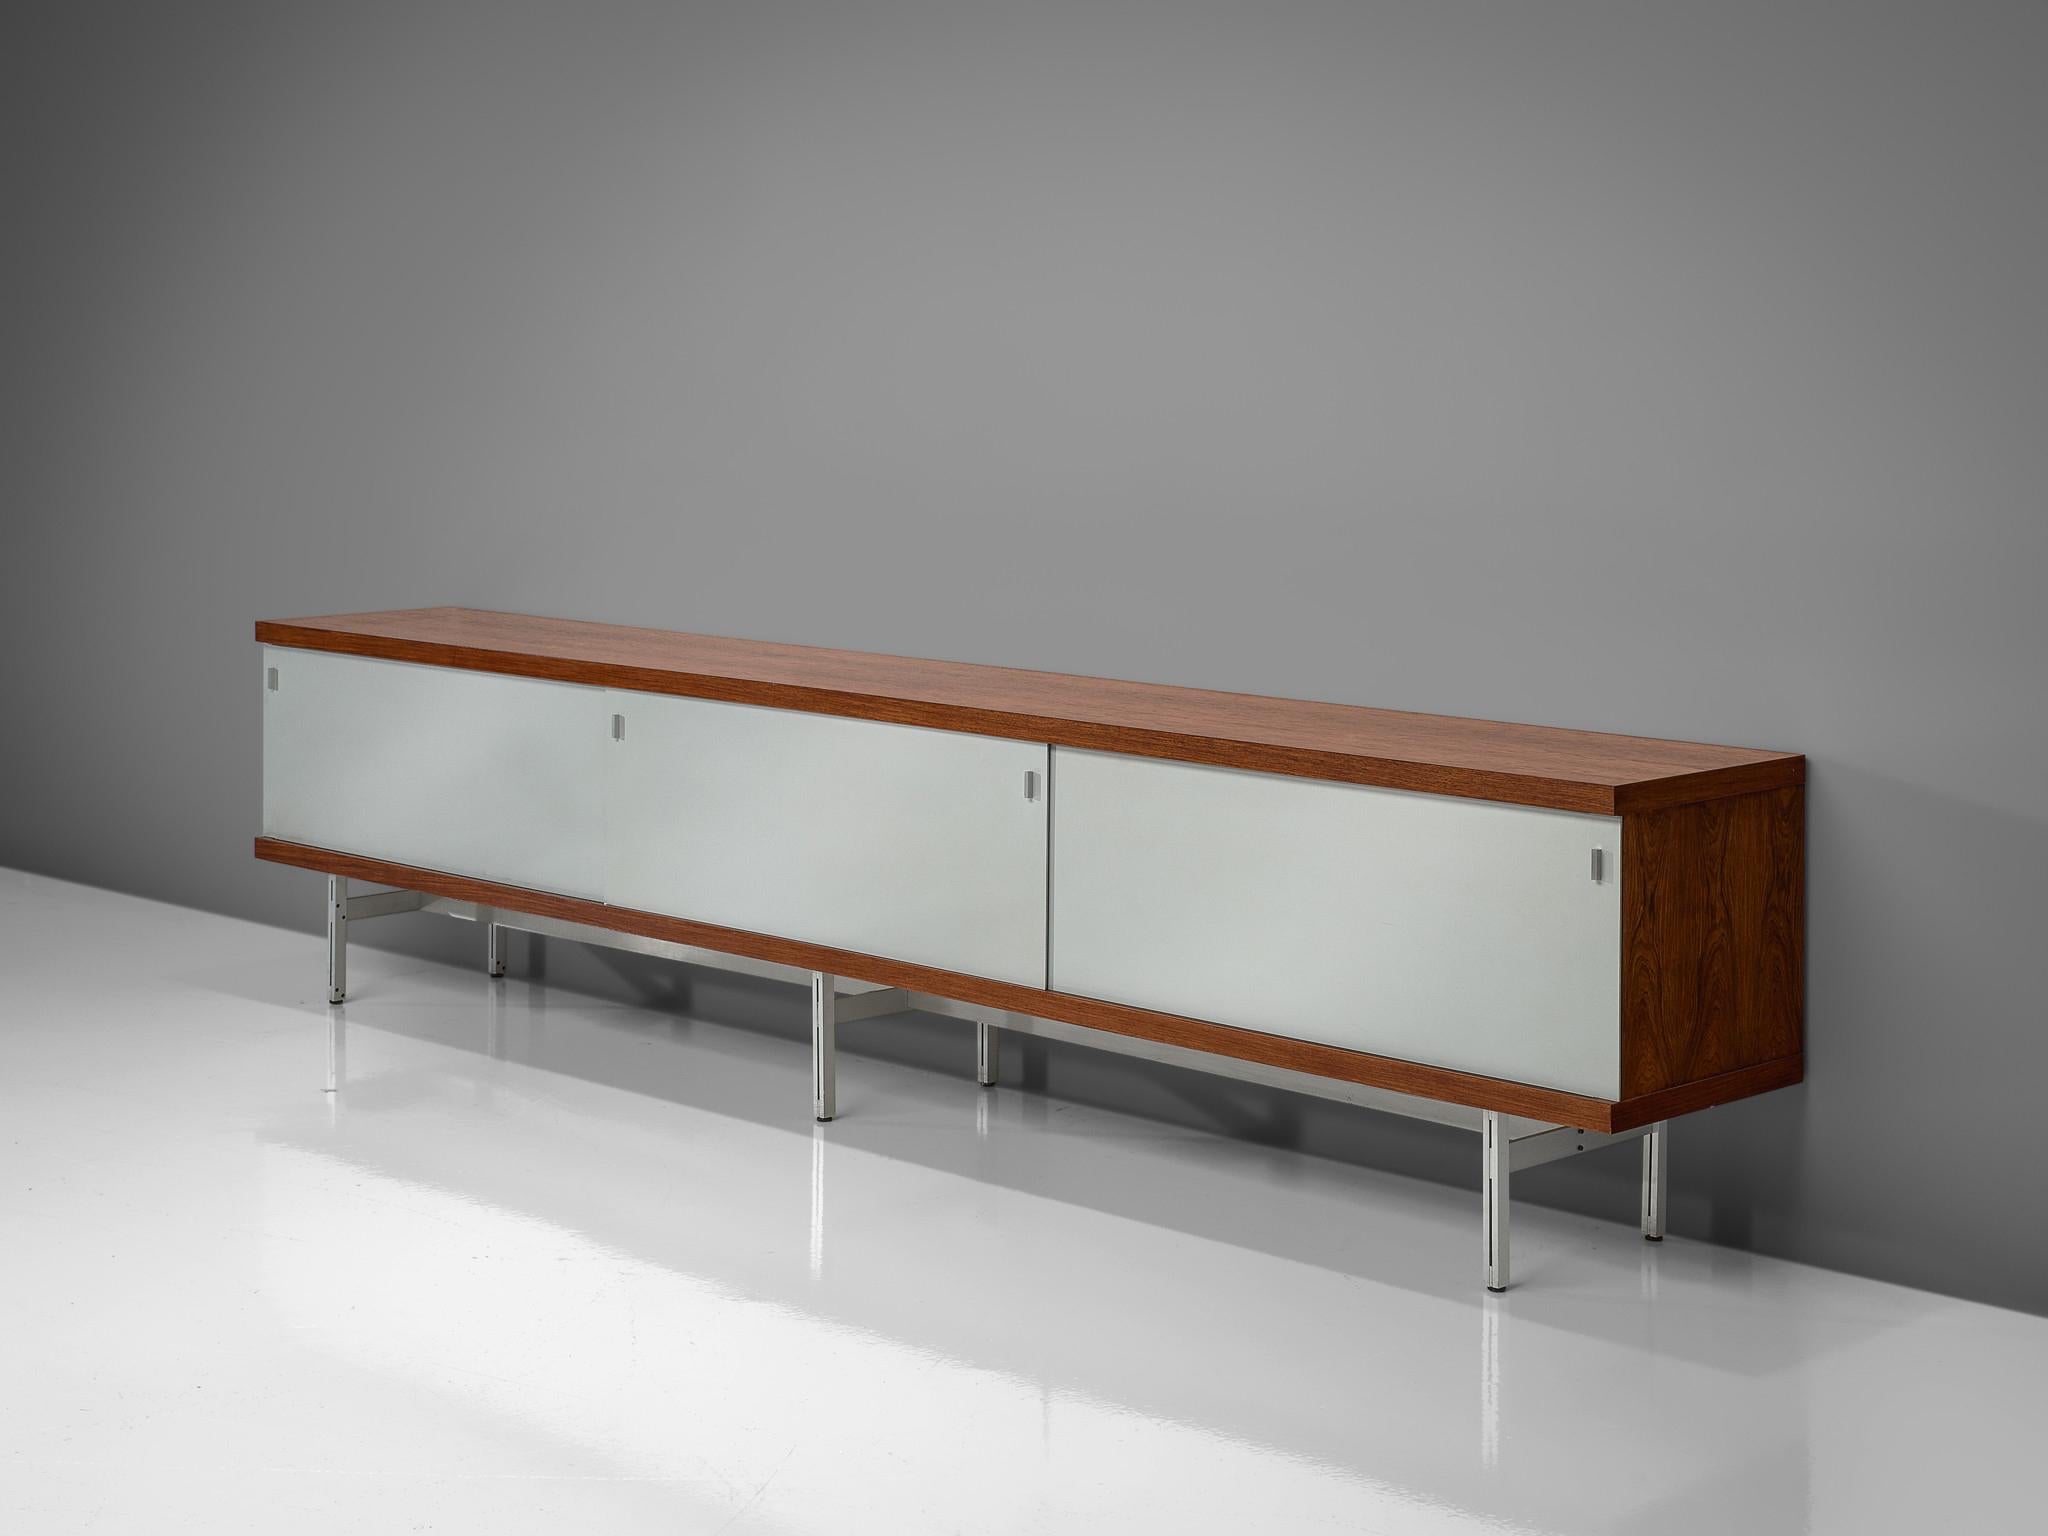 Horst Brüning for Behr, sideboard, rosewood, metal, plastic, Germany, 1960

This geometric sideboard by German designer Horst Brüning is held by a metal base that forms a structured look. Rosewood with a natural grain is building the frame of the